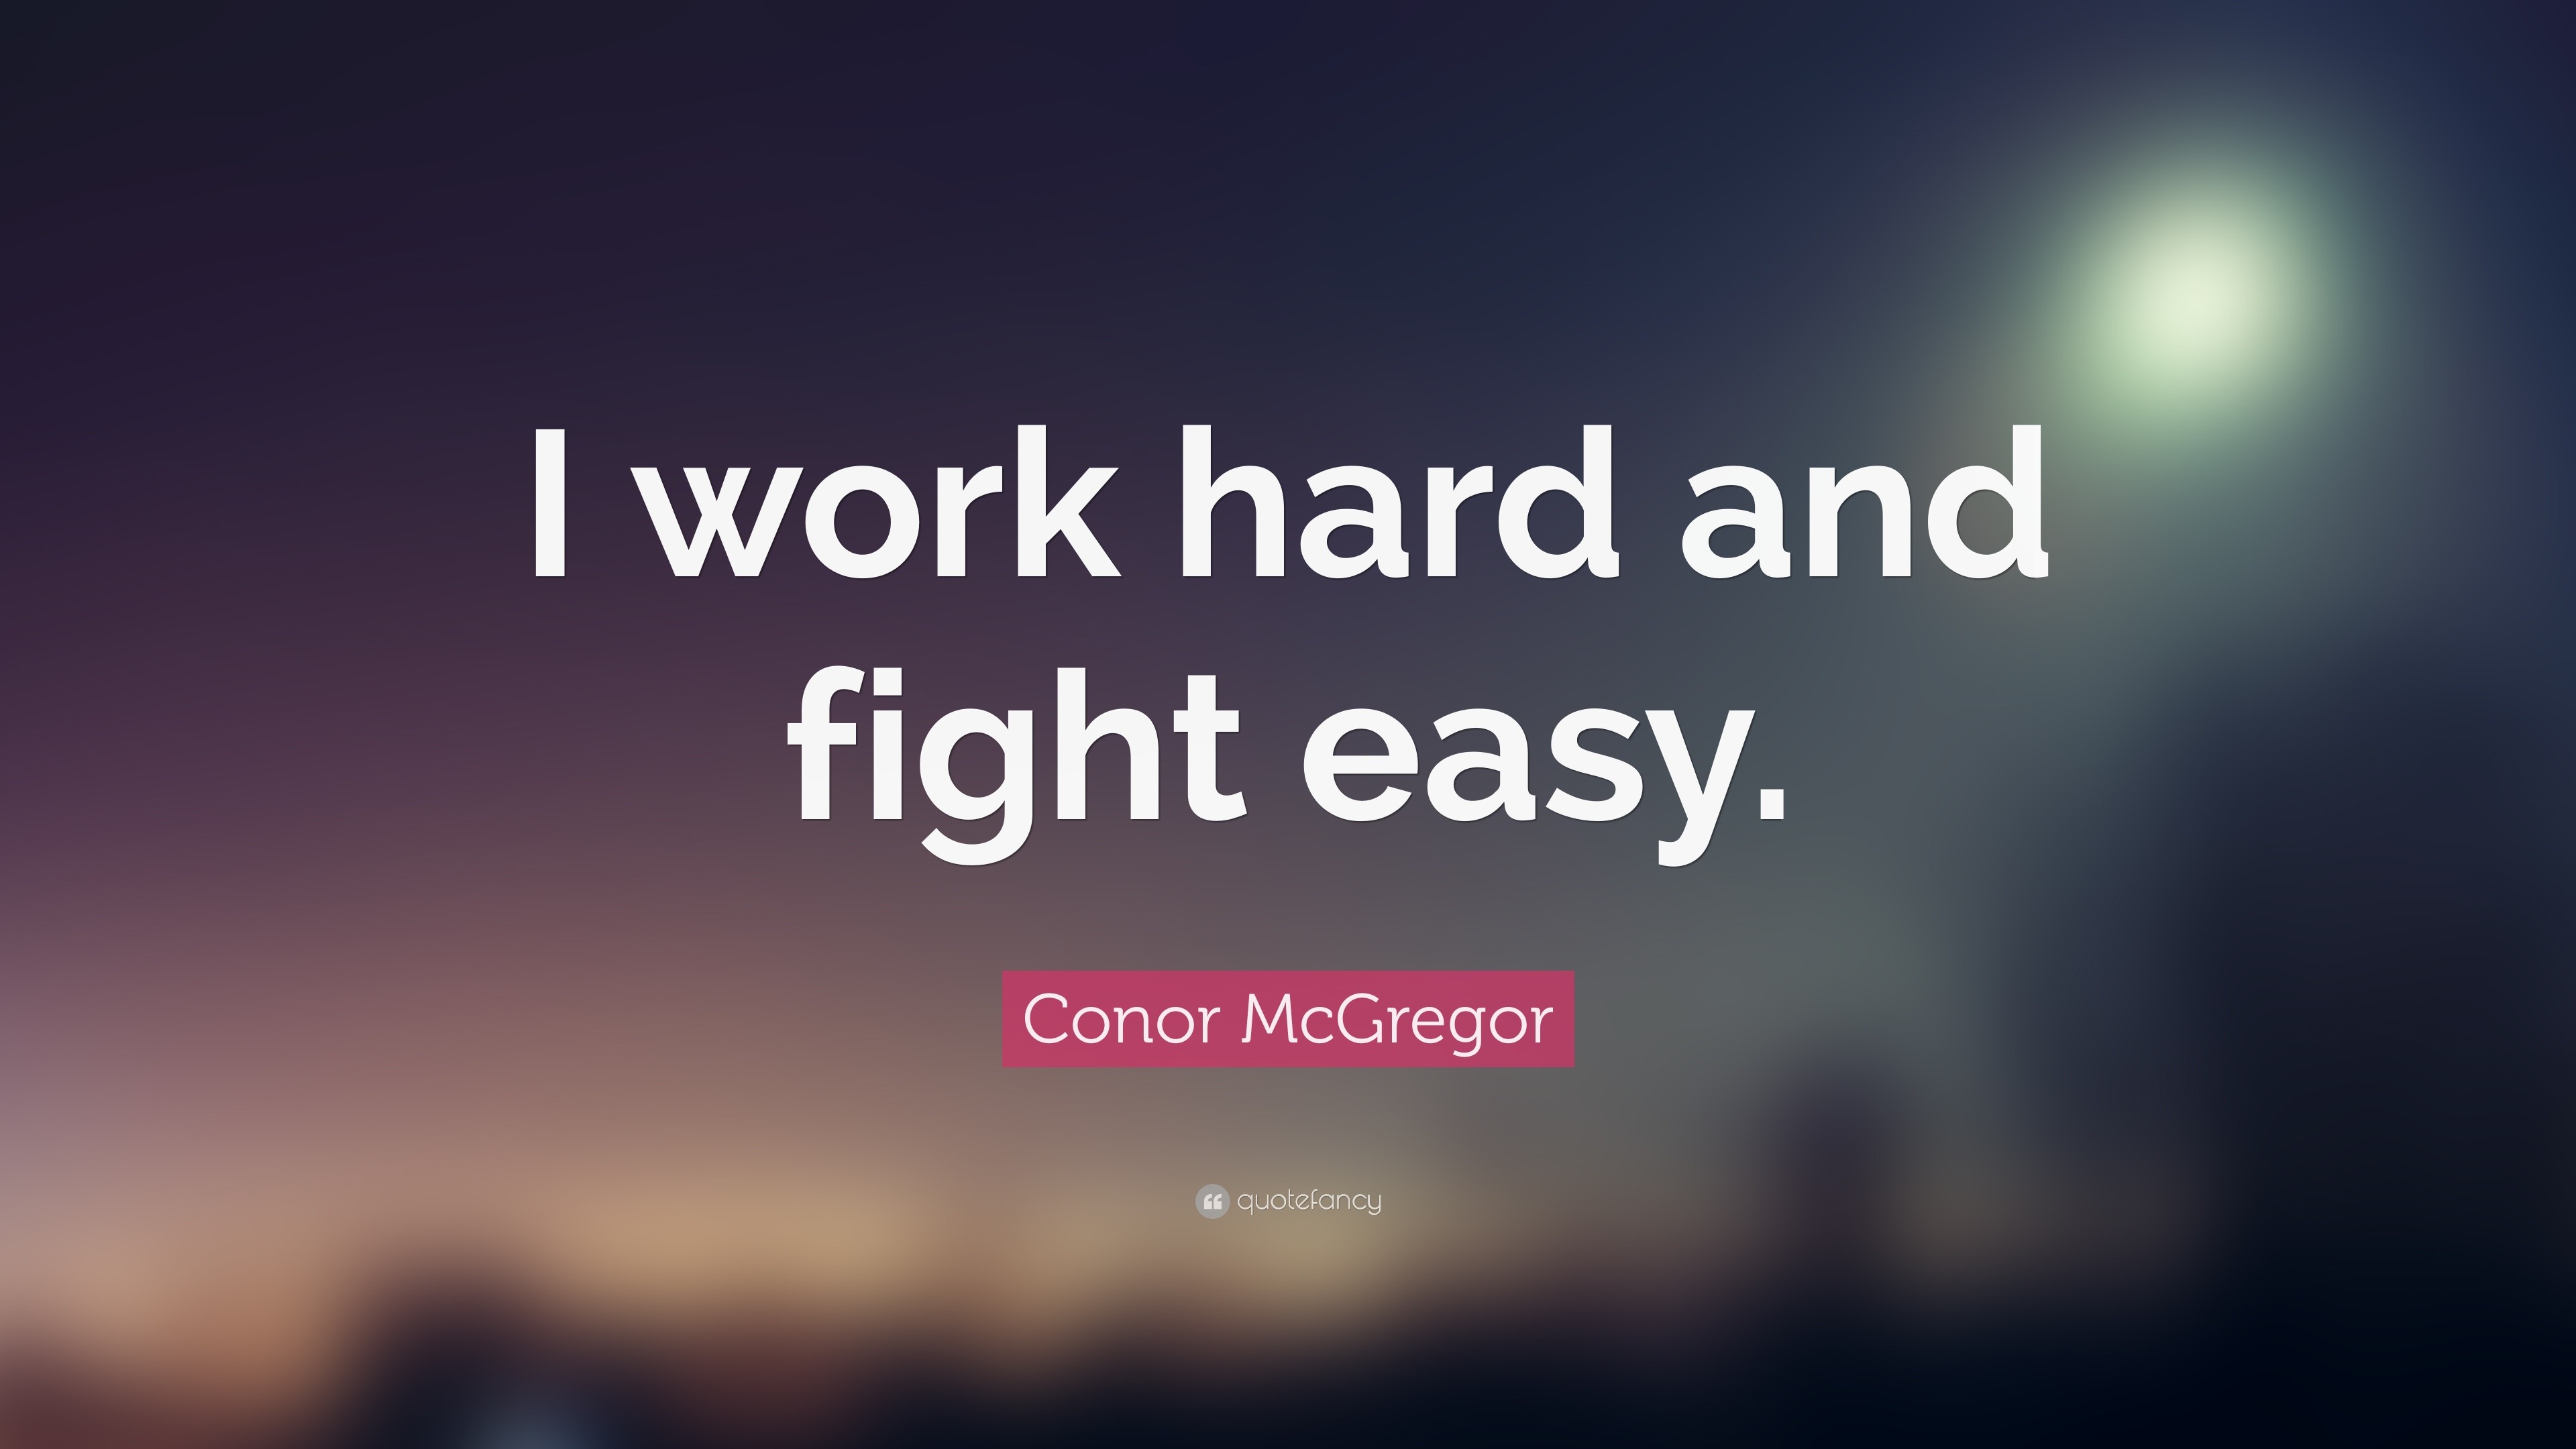 Conor McGregor Quote “I work hard and fight easy.” (17